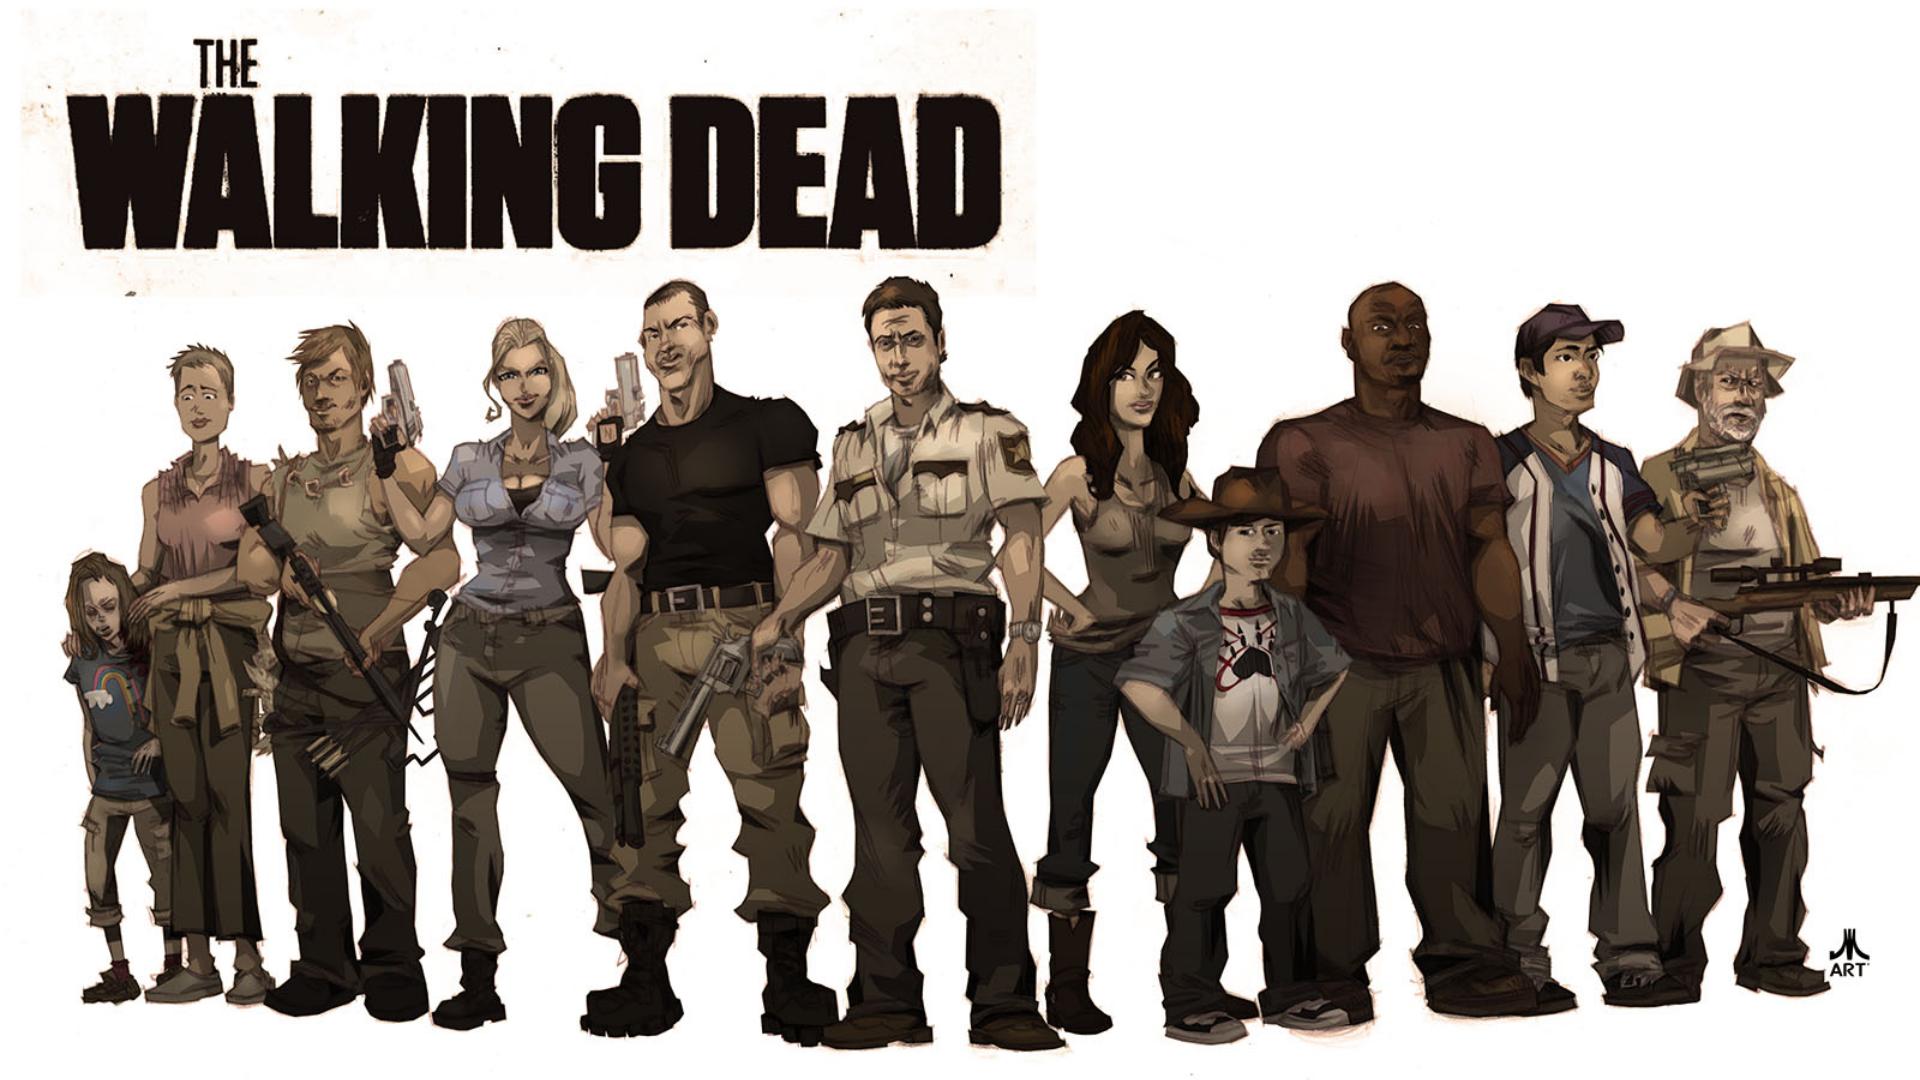 The Walking Dead   Wallpaper High Definition High Quality